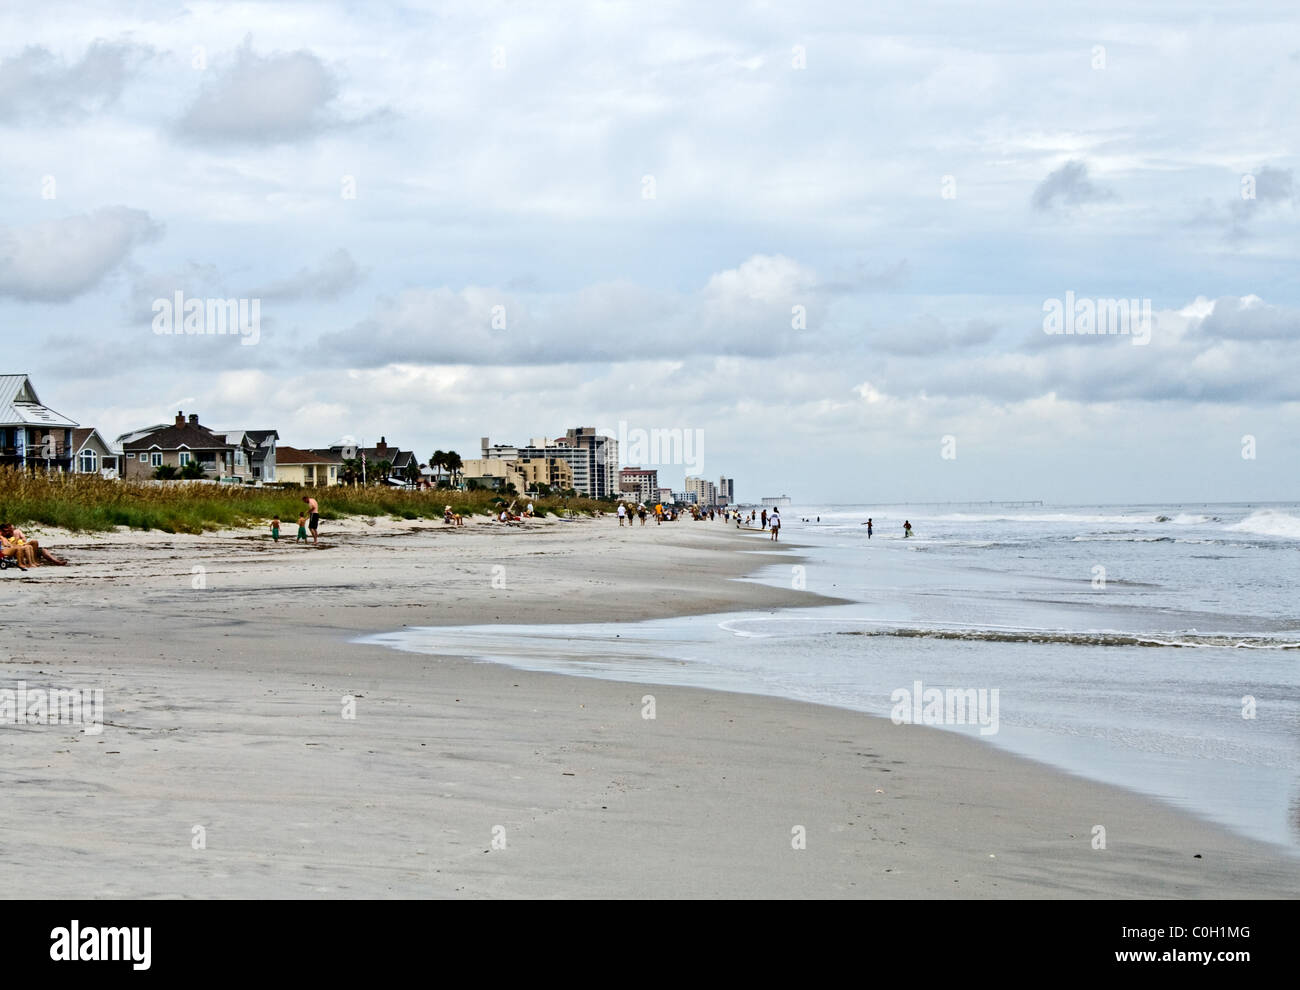 beach tranquil scene ocean water sand tourists tourism Jacksonville waves buildings high-rise relaxation retirement Stock Photo